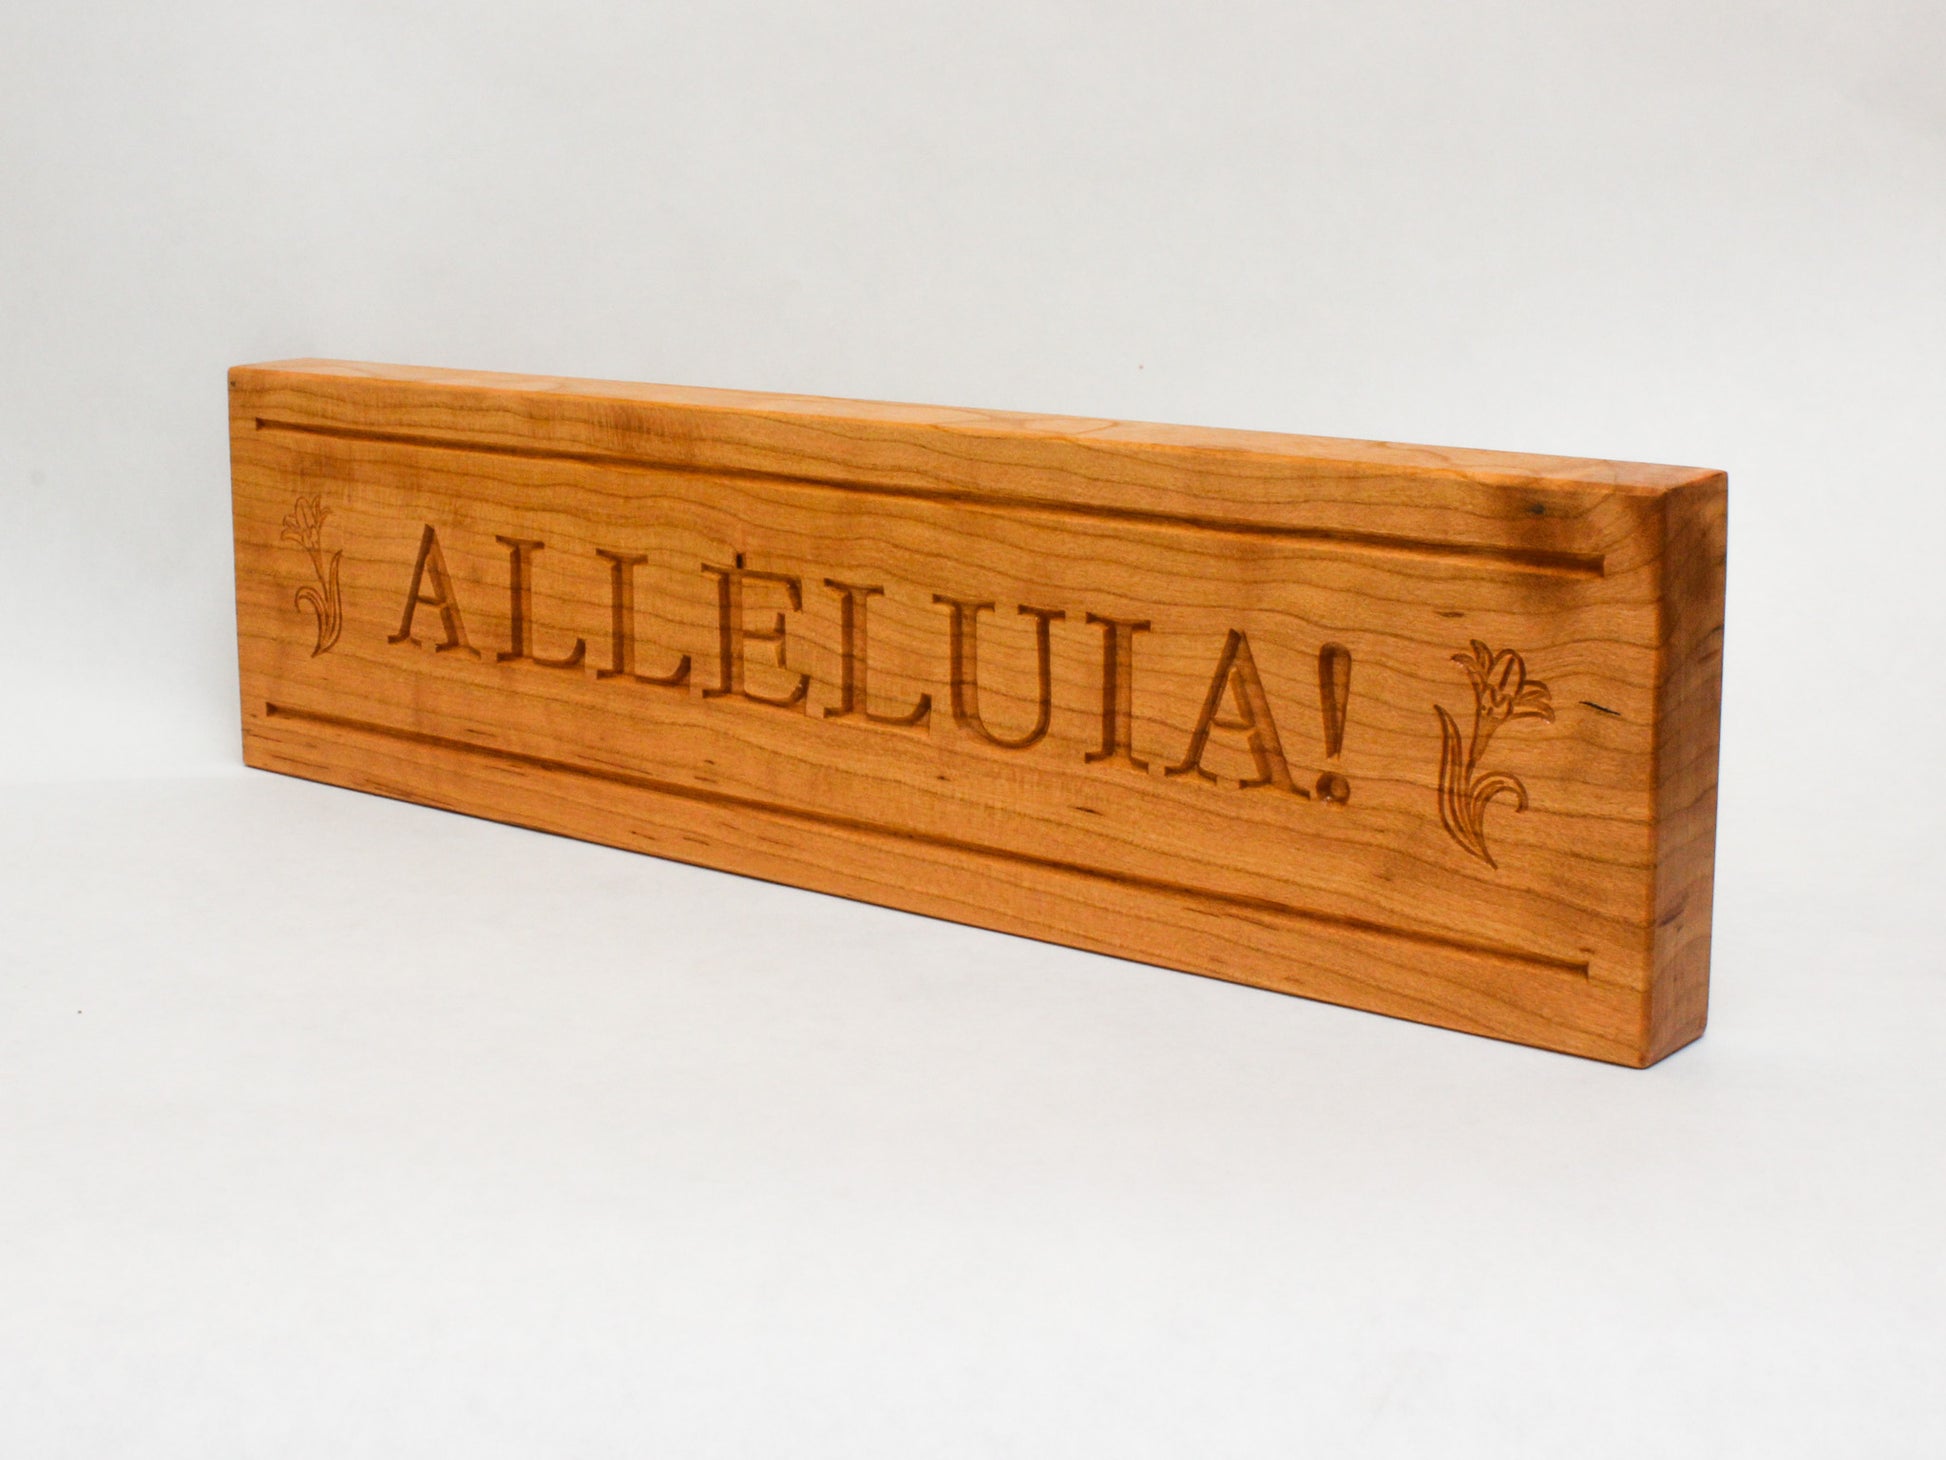 Side view of engraved Alleluia Easter sign to show thickness of wood